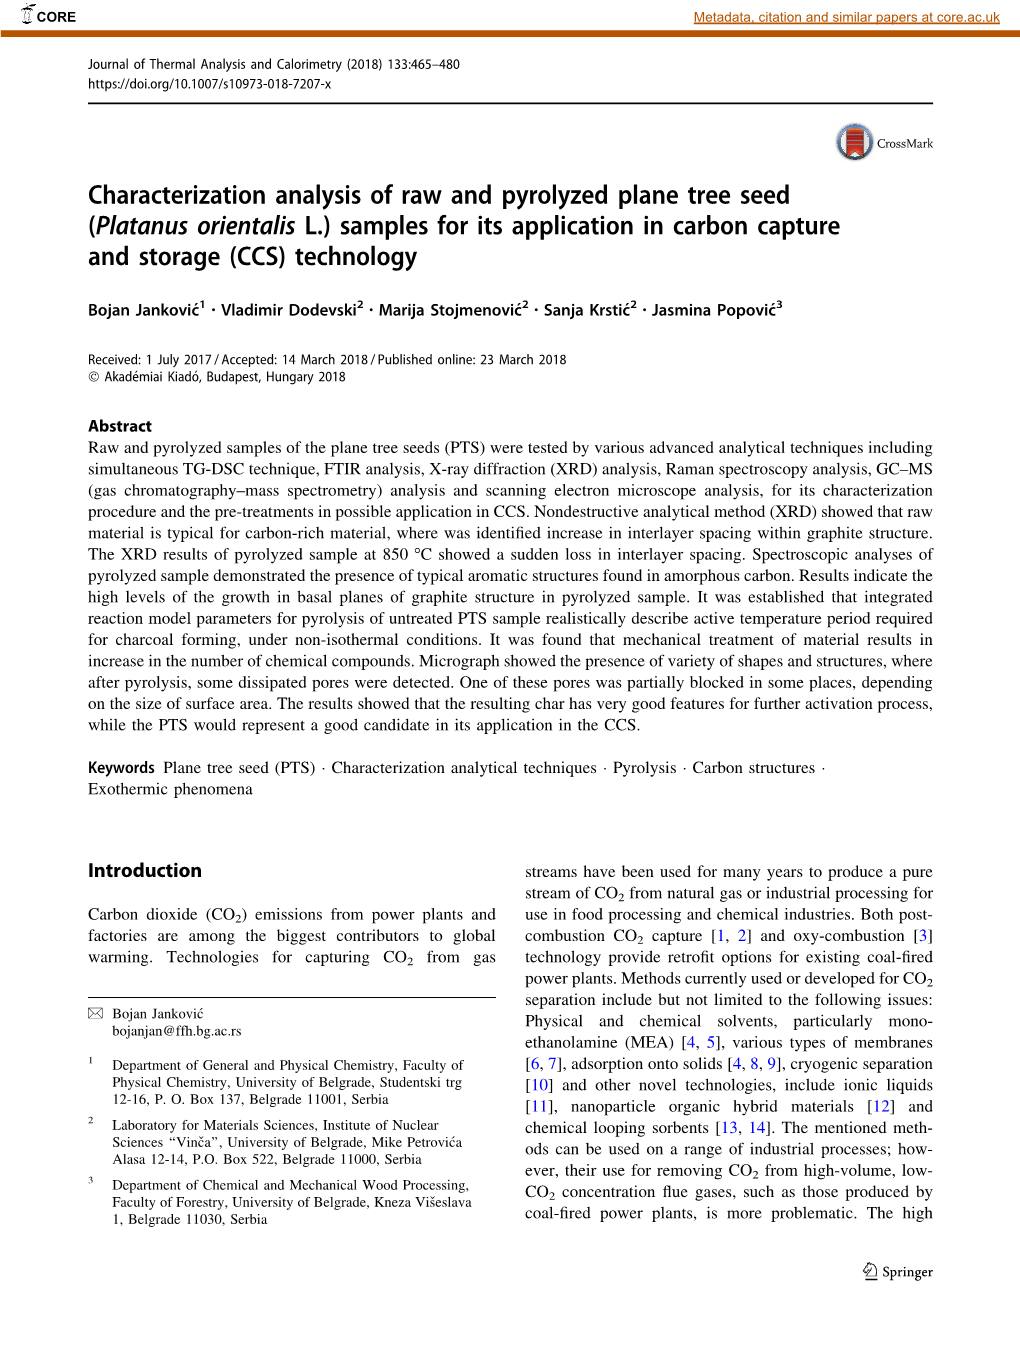 Characterization Analysis of Raw and Pyrolyzed Plane Tree Seed (Platanus Orientalis L.) Samples for Its Application in Carbon Capture and Storage (CCS) Technology